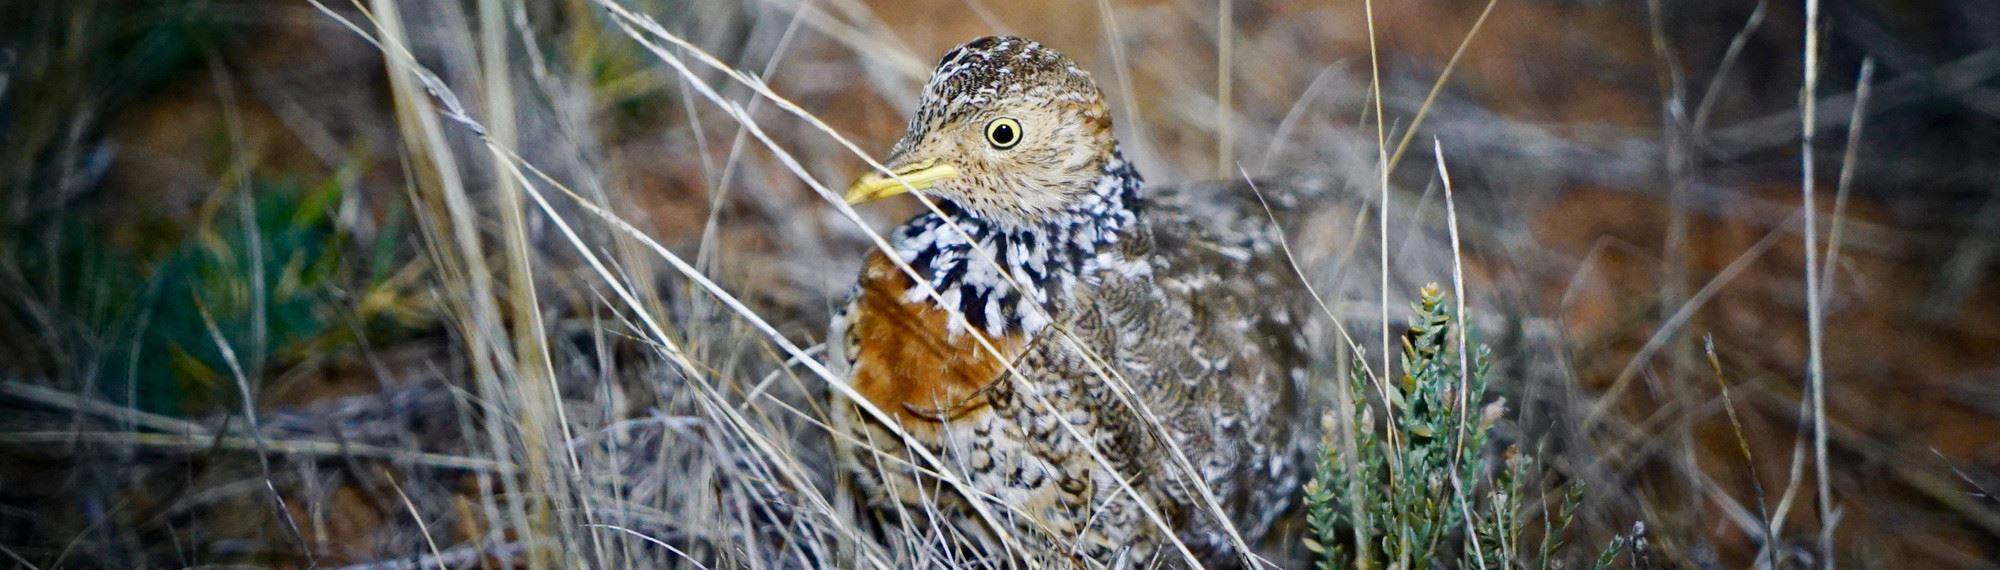 Plains Wanderer bird standing in dry grass. Side view of bird, with its body camouflaged in the grass, looking towards the camera.